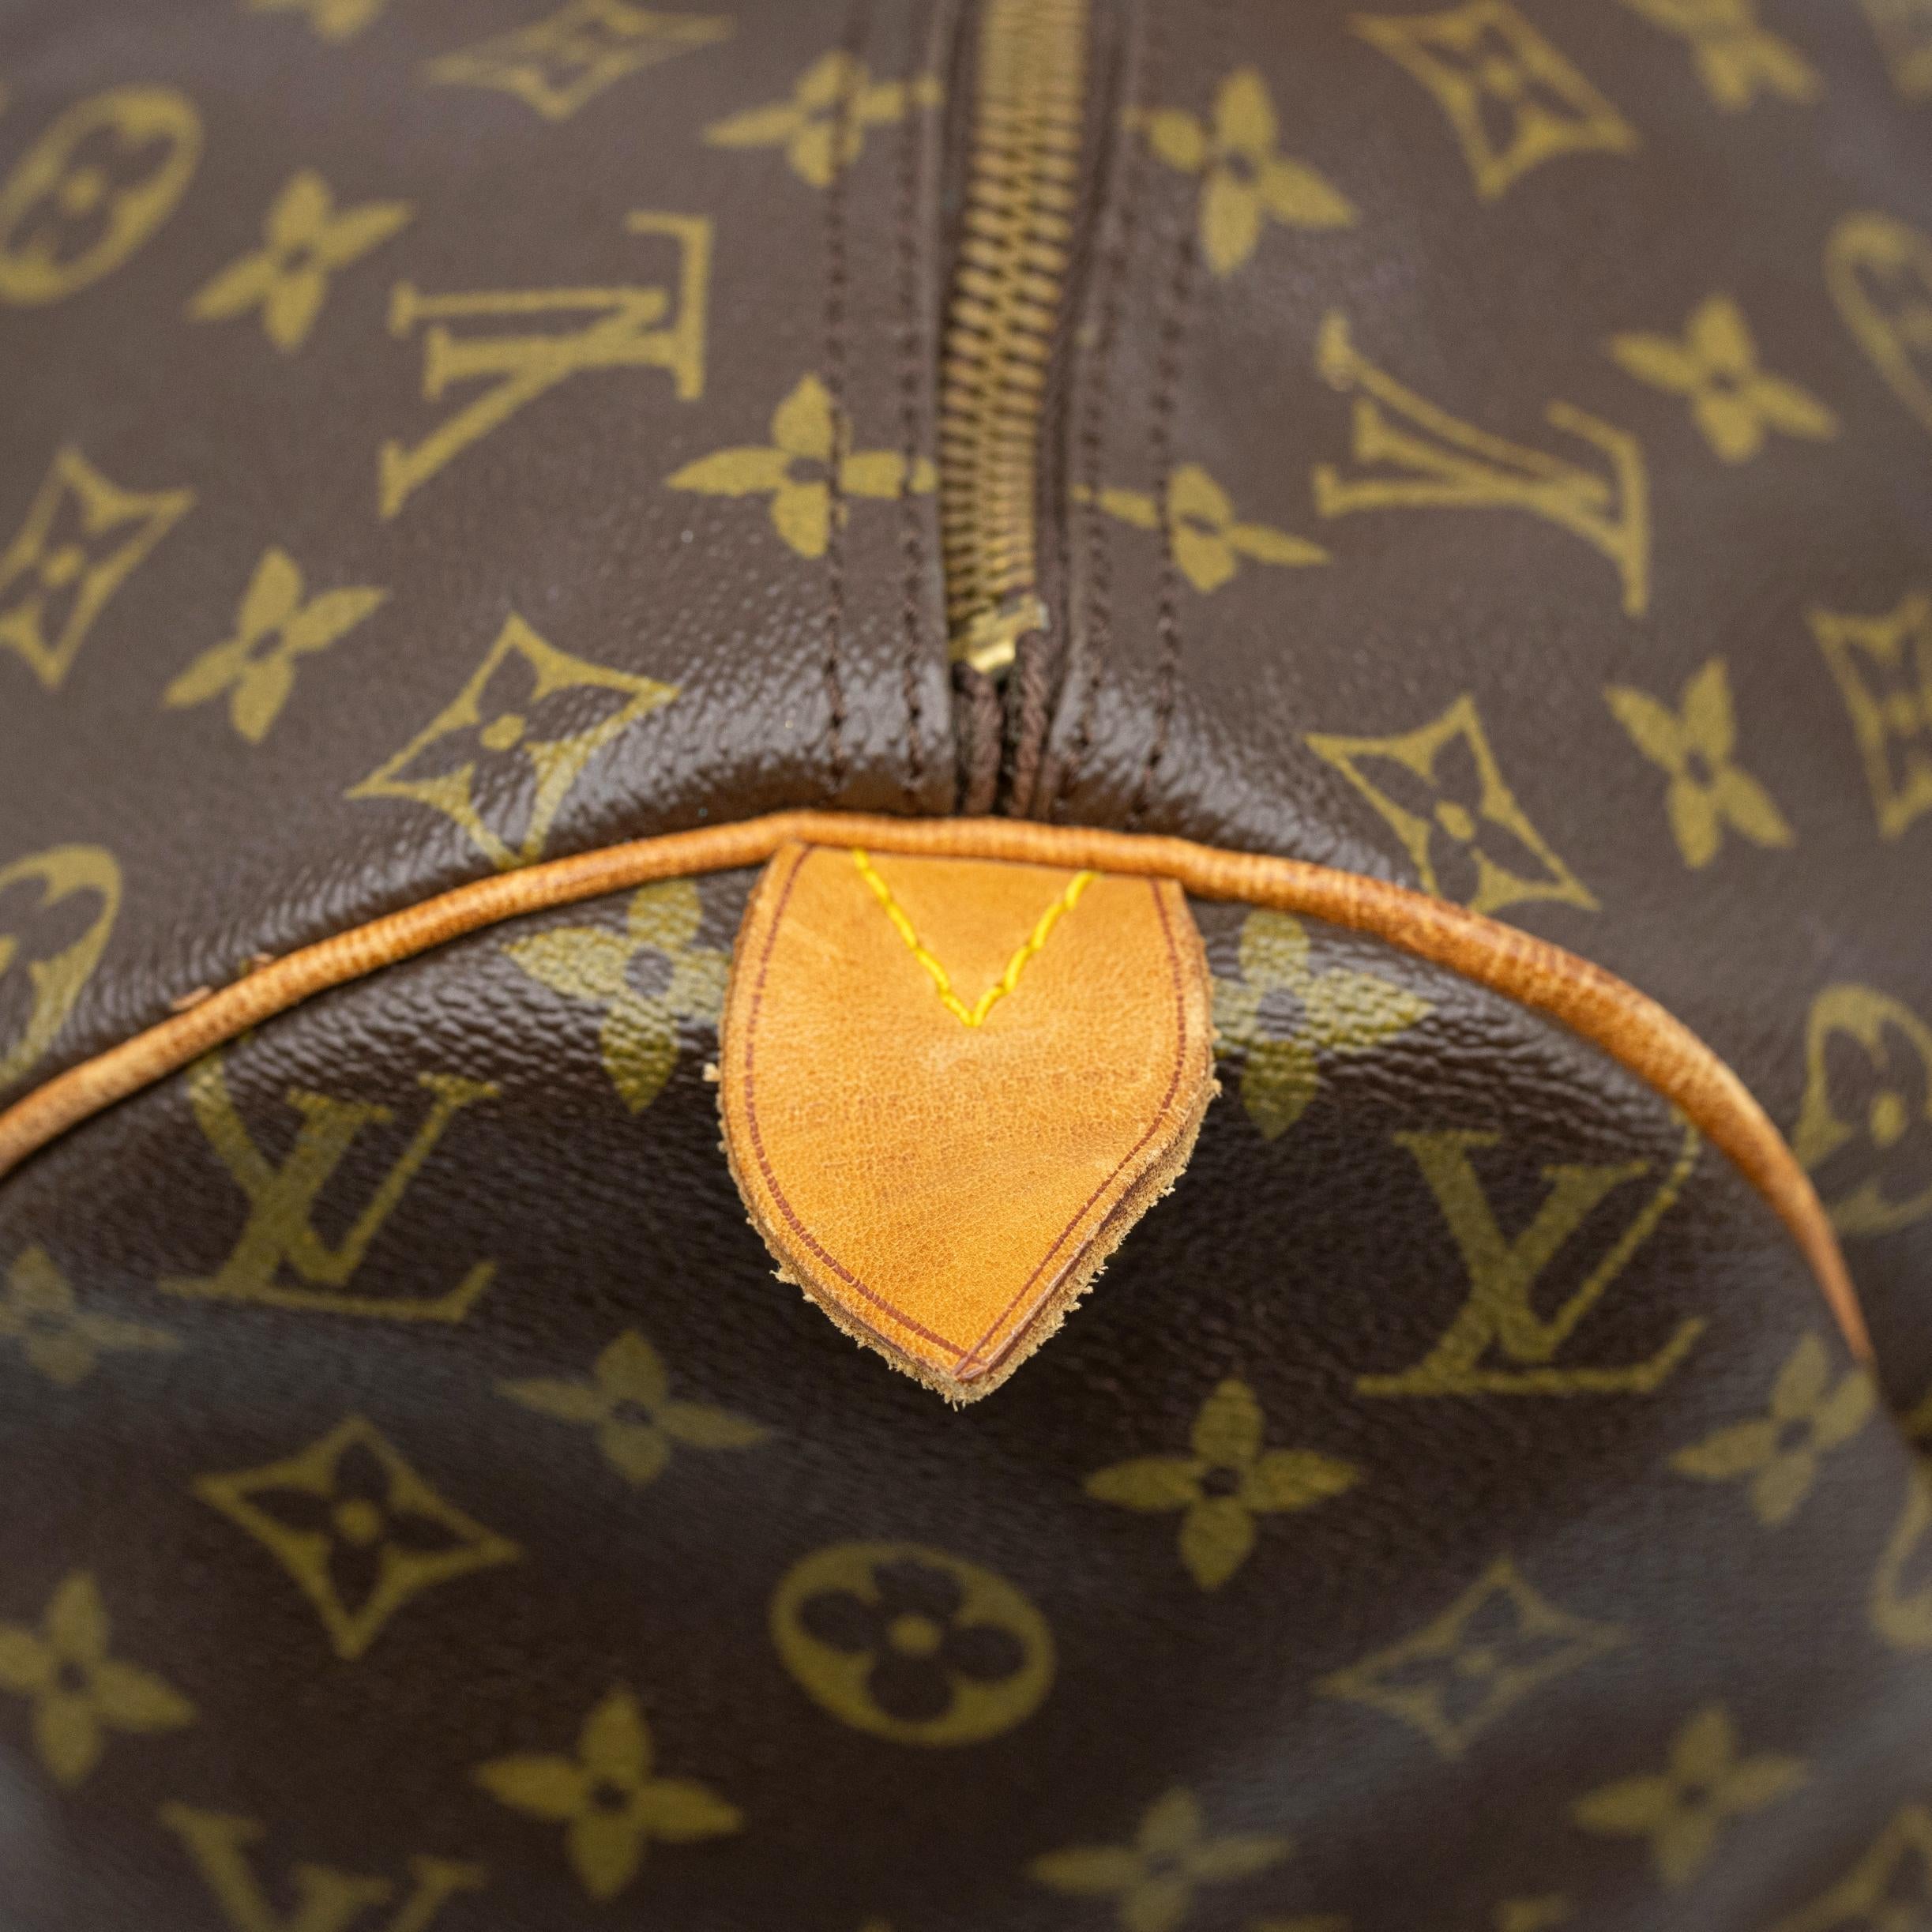 Brown Louis Vuitton Vintage French Luggage Company “Speedy 40